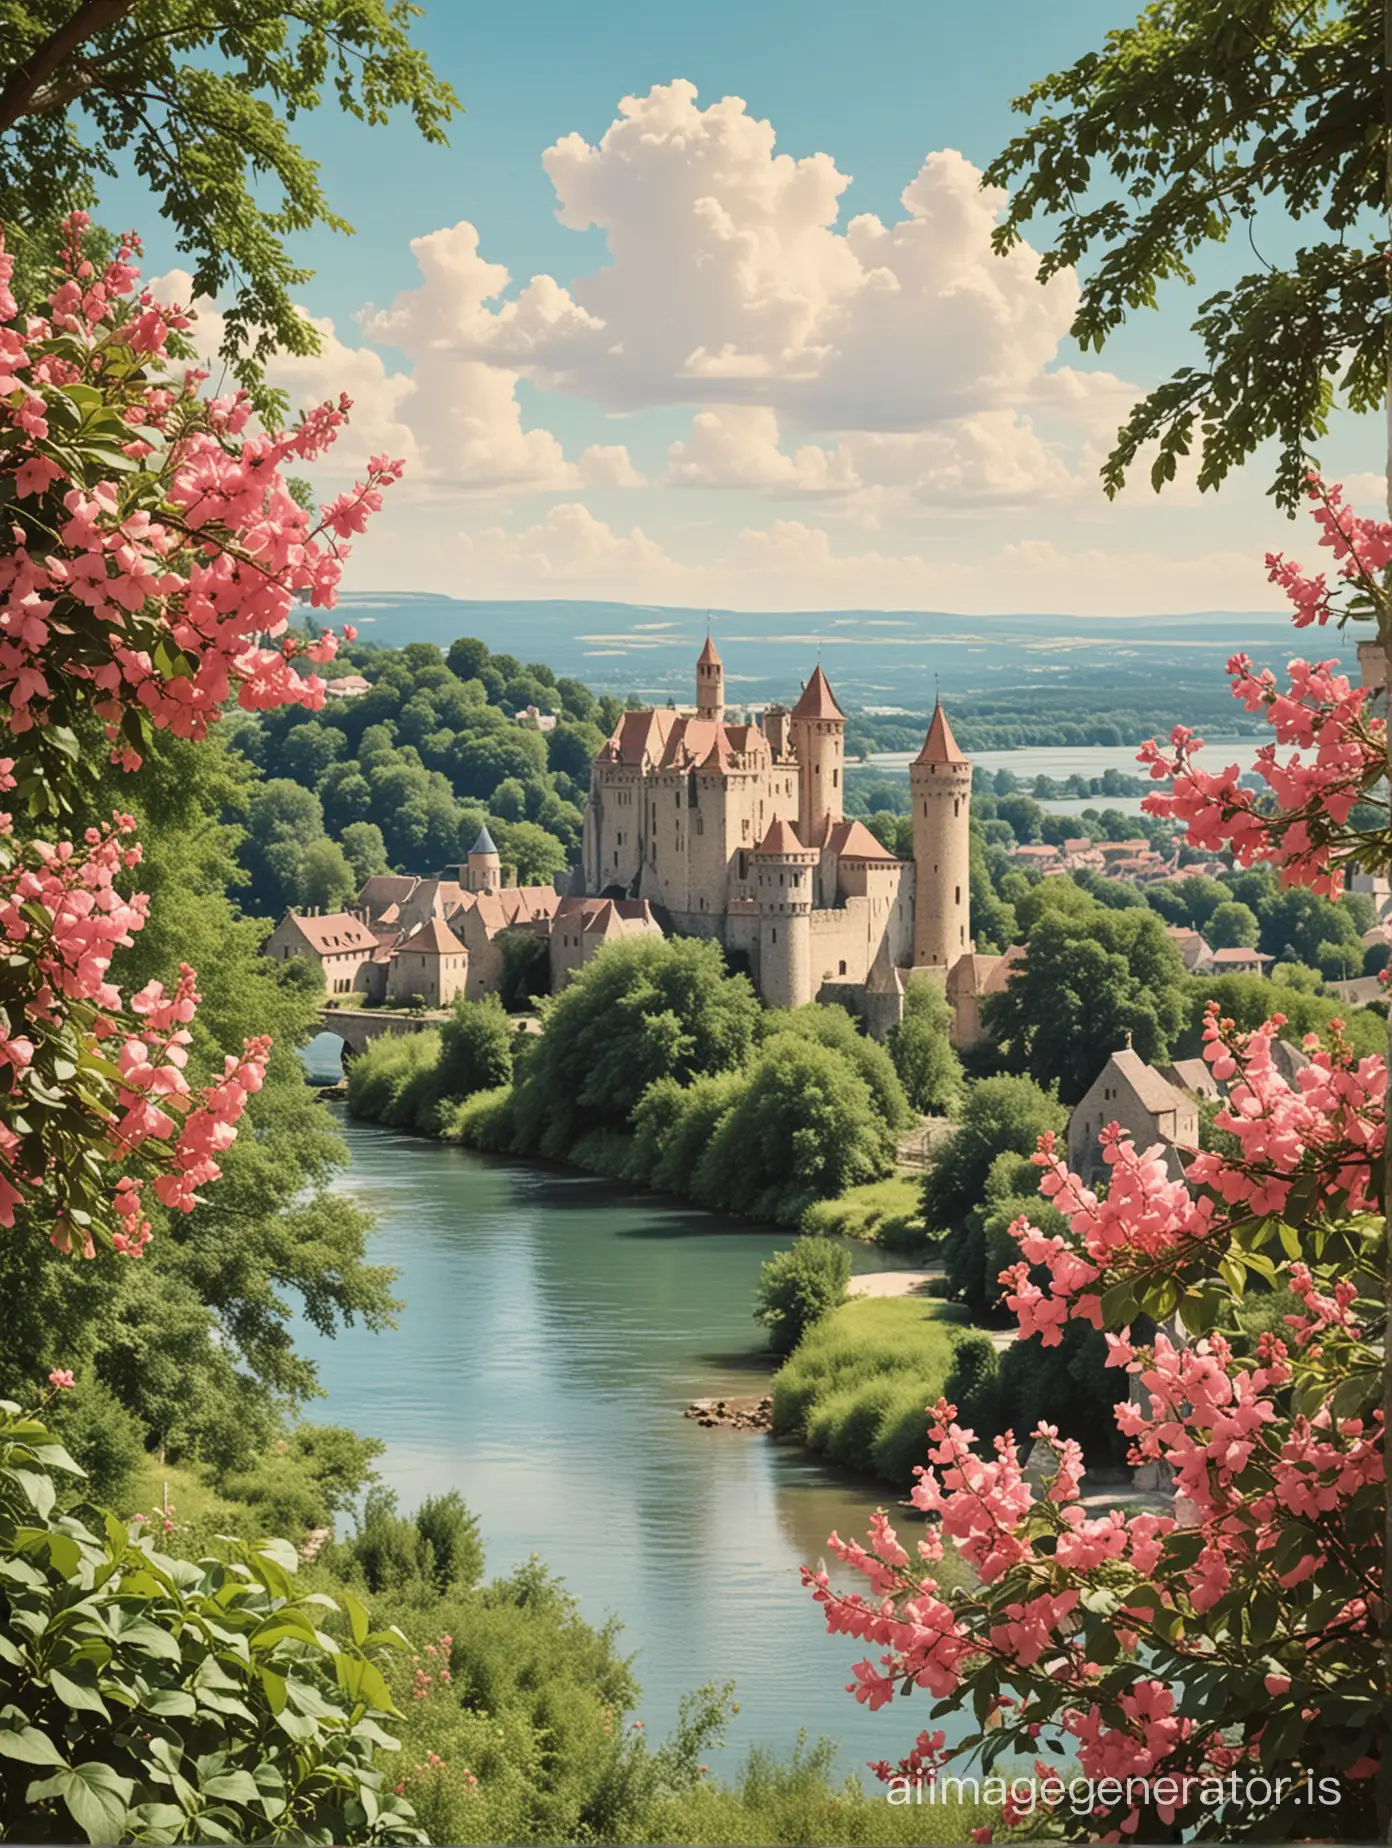 postcard, old-fashioned style, small medieval castle scene, summer, blue river, with medieval city in distance, pink bourgainvillier